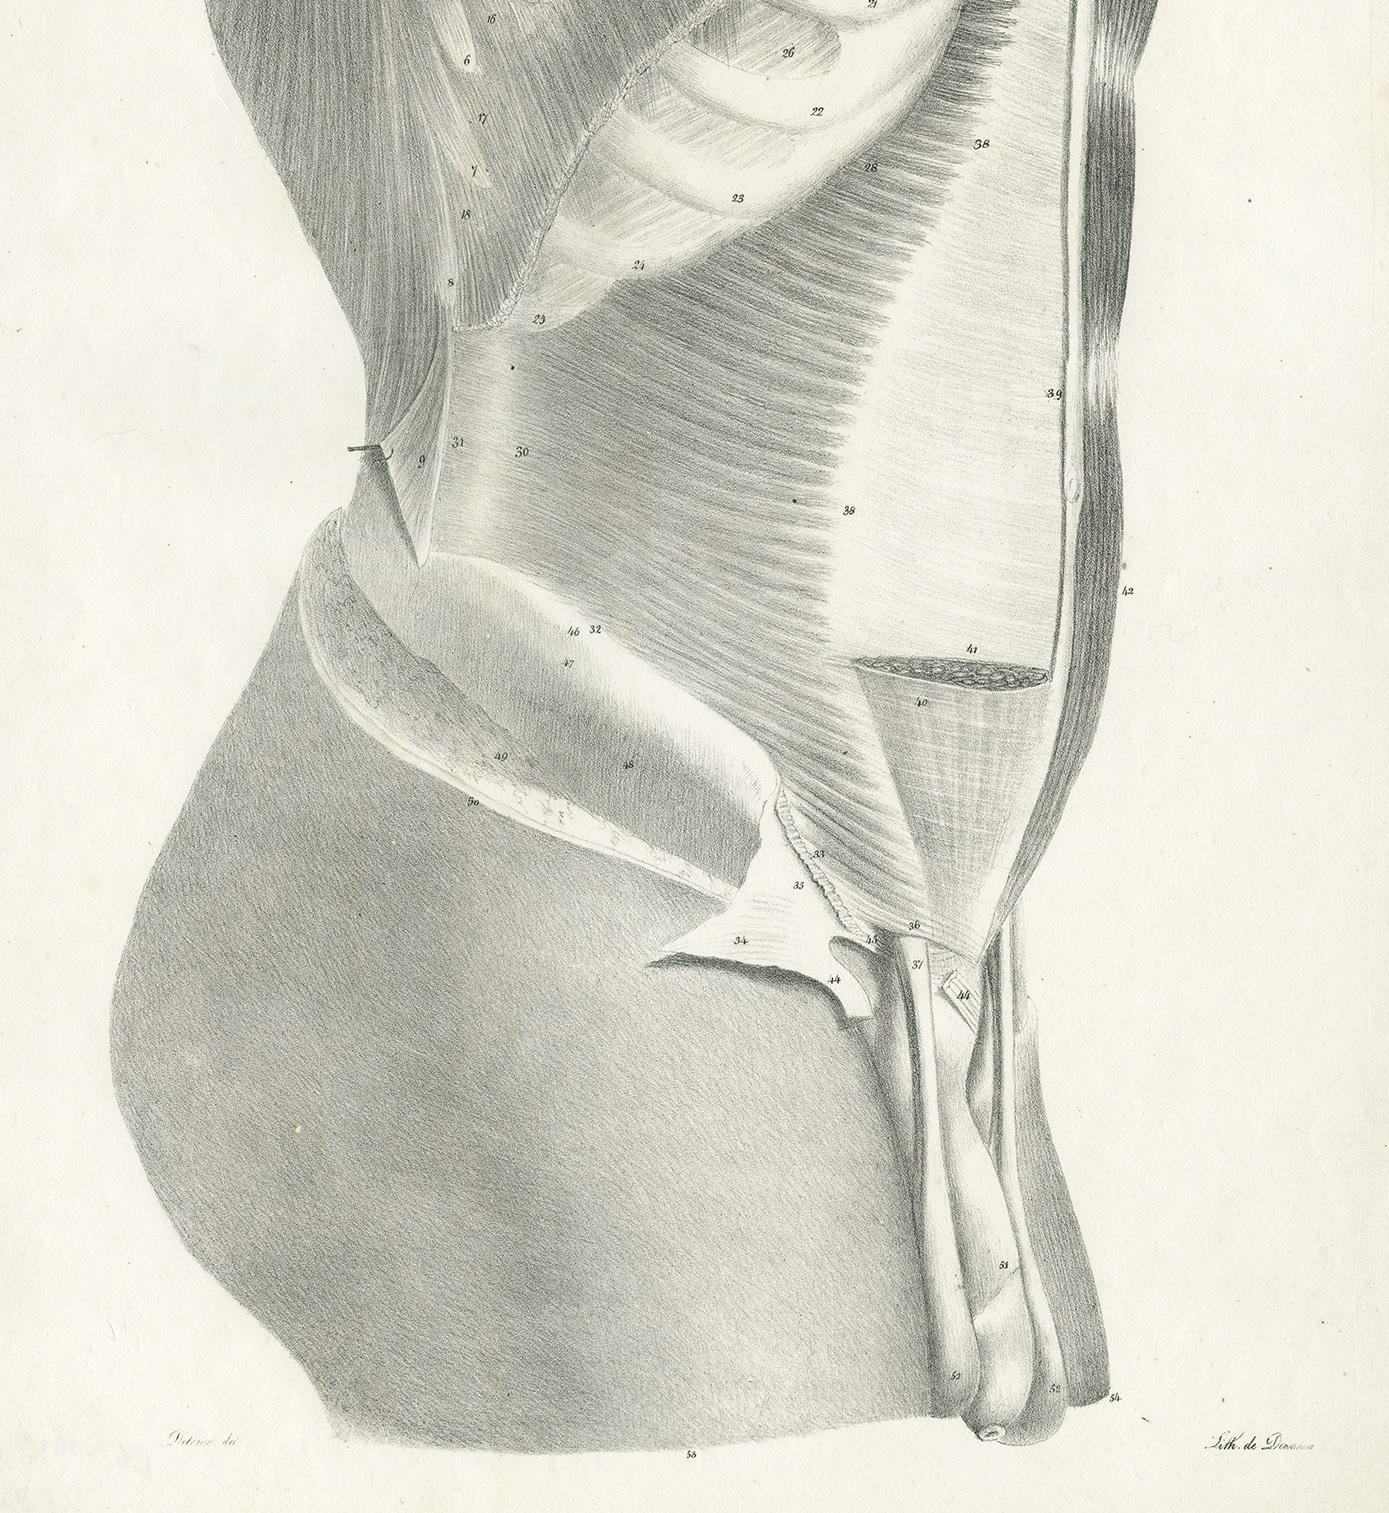 19th Century Pl. LXXIV Antique Anatomy / Medical Print of the Male Torso by Cloquet, '1821' For Sale